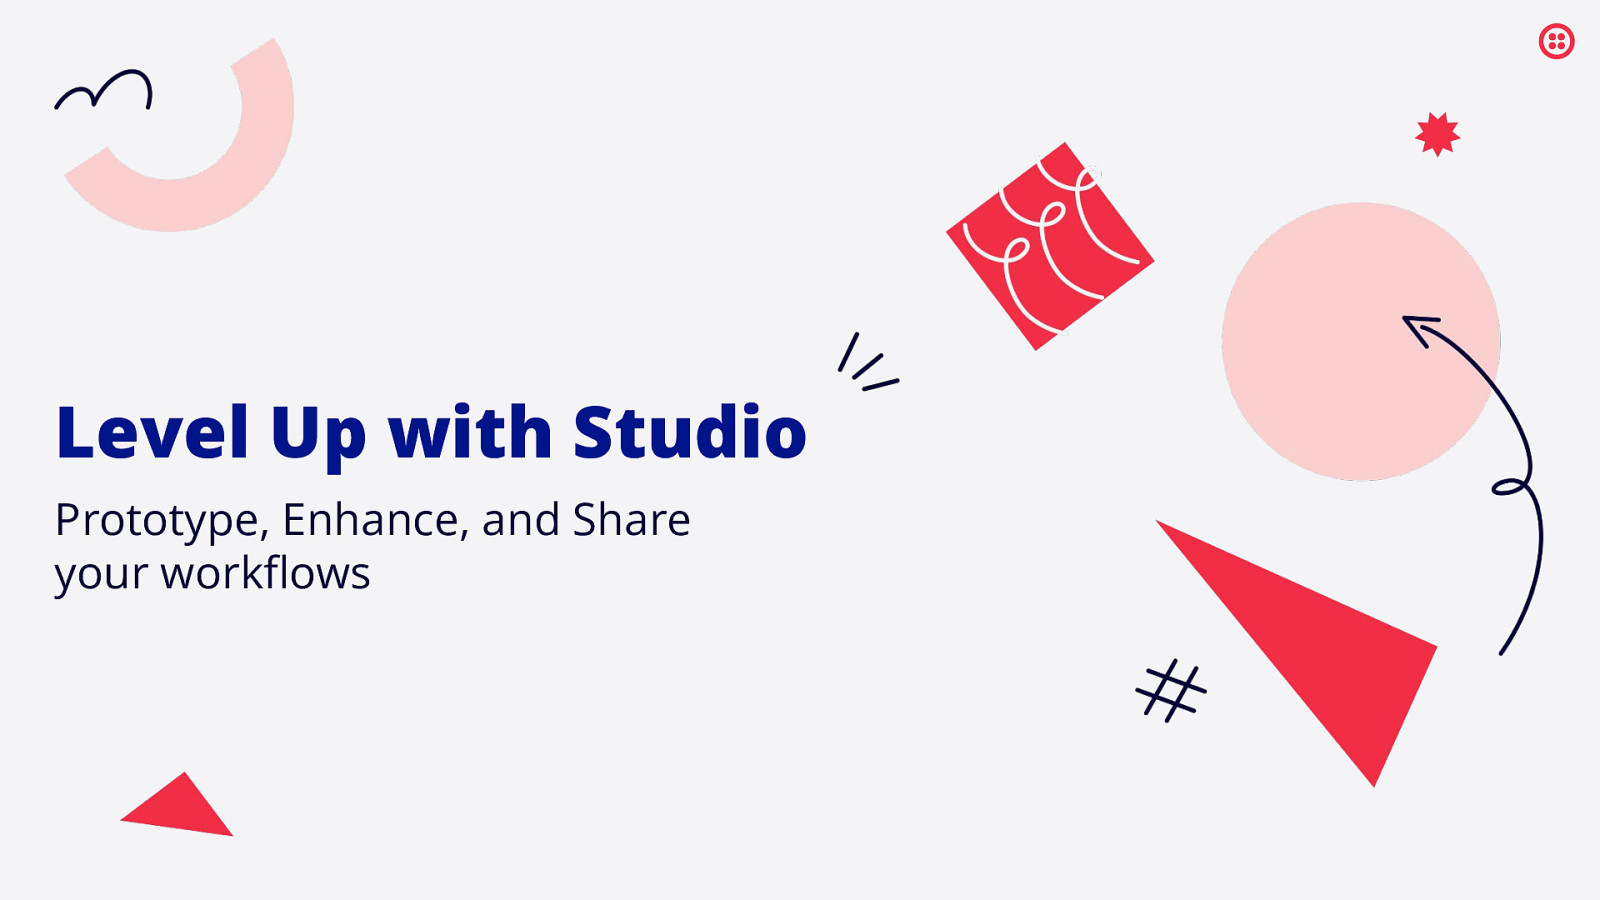 Level Up with Studio - Prototype, Enhance, and Share your Workflows by Anthony Dellavecchia